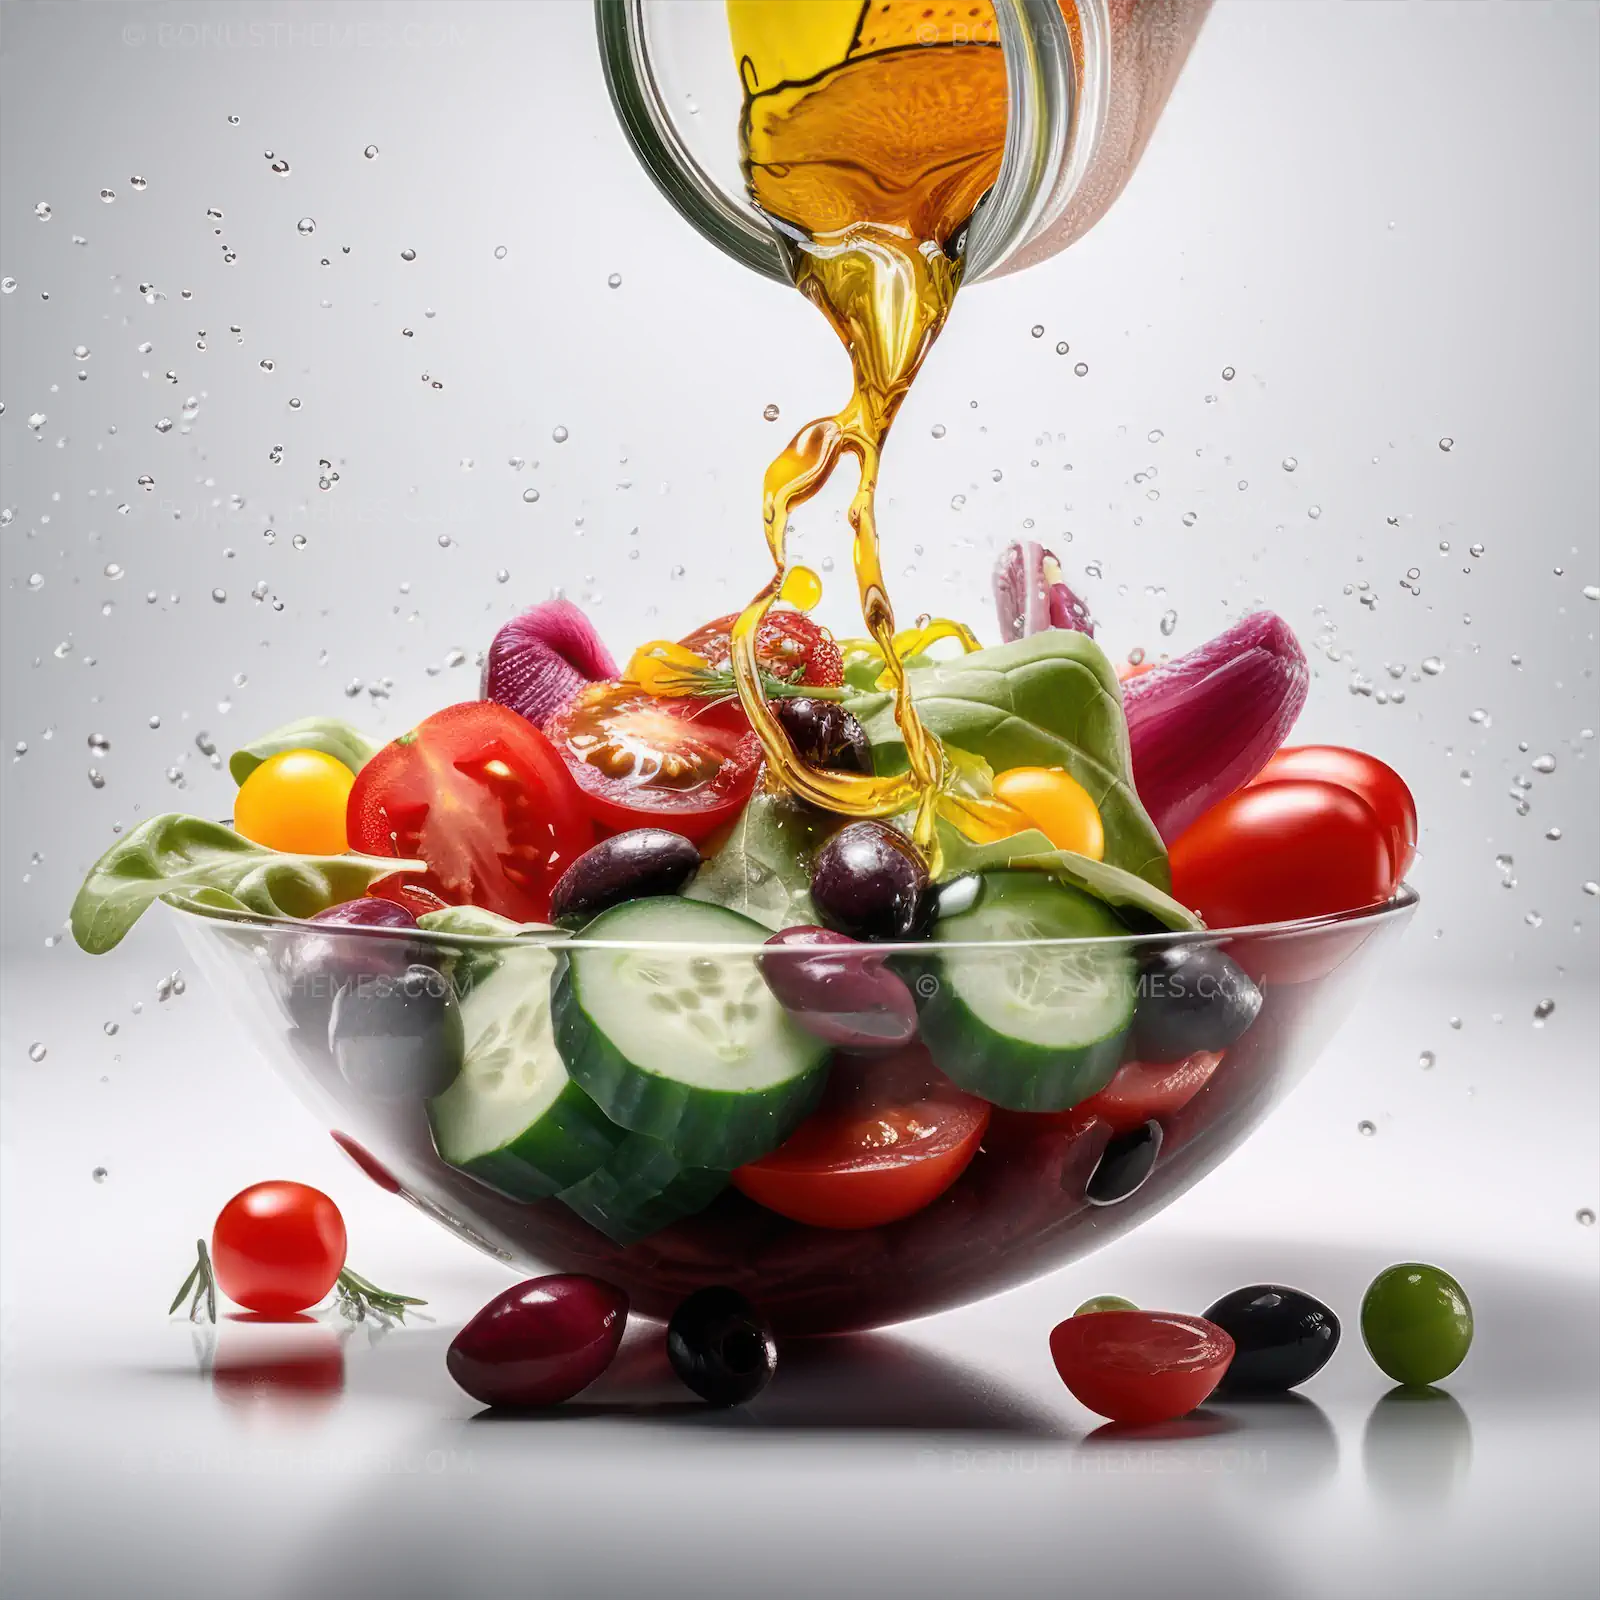 Greek salad in a bowl with olive oil